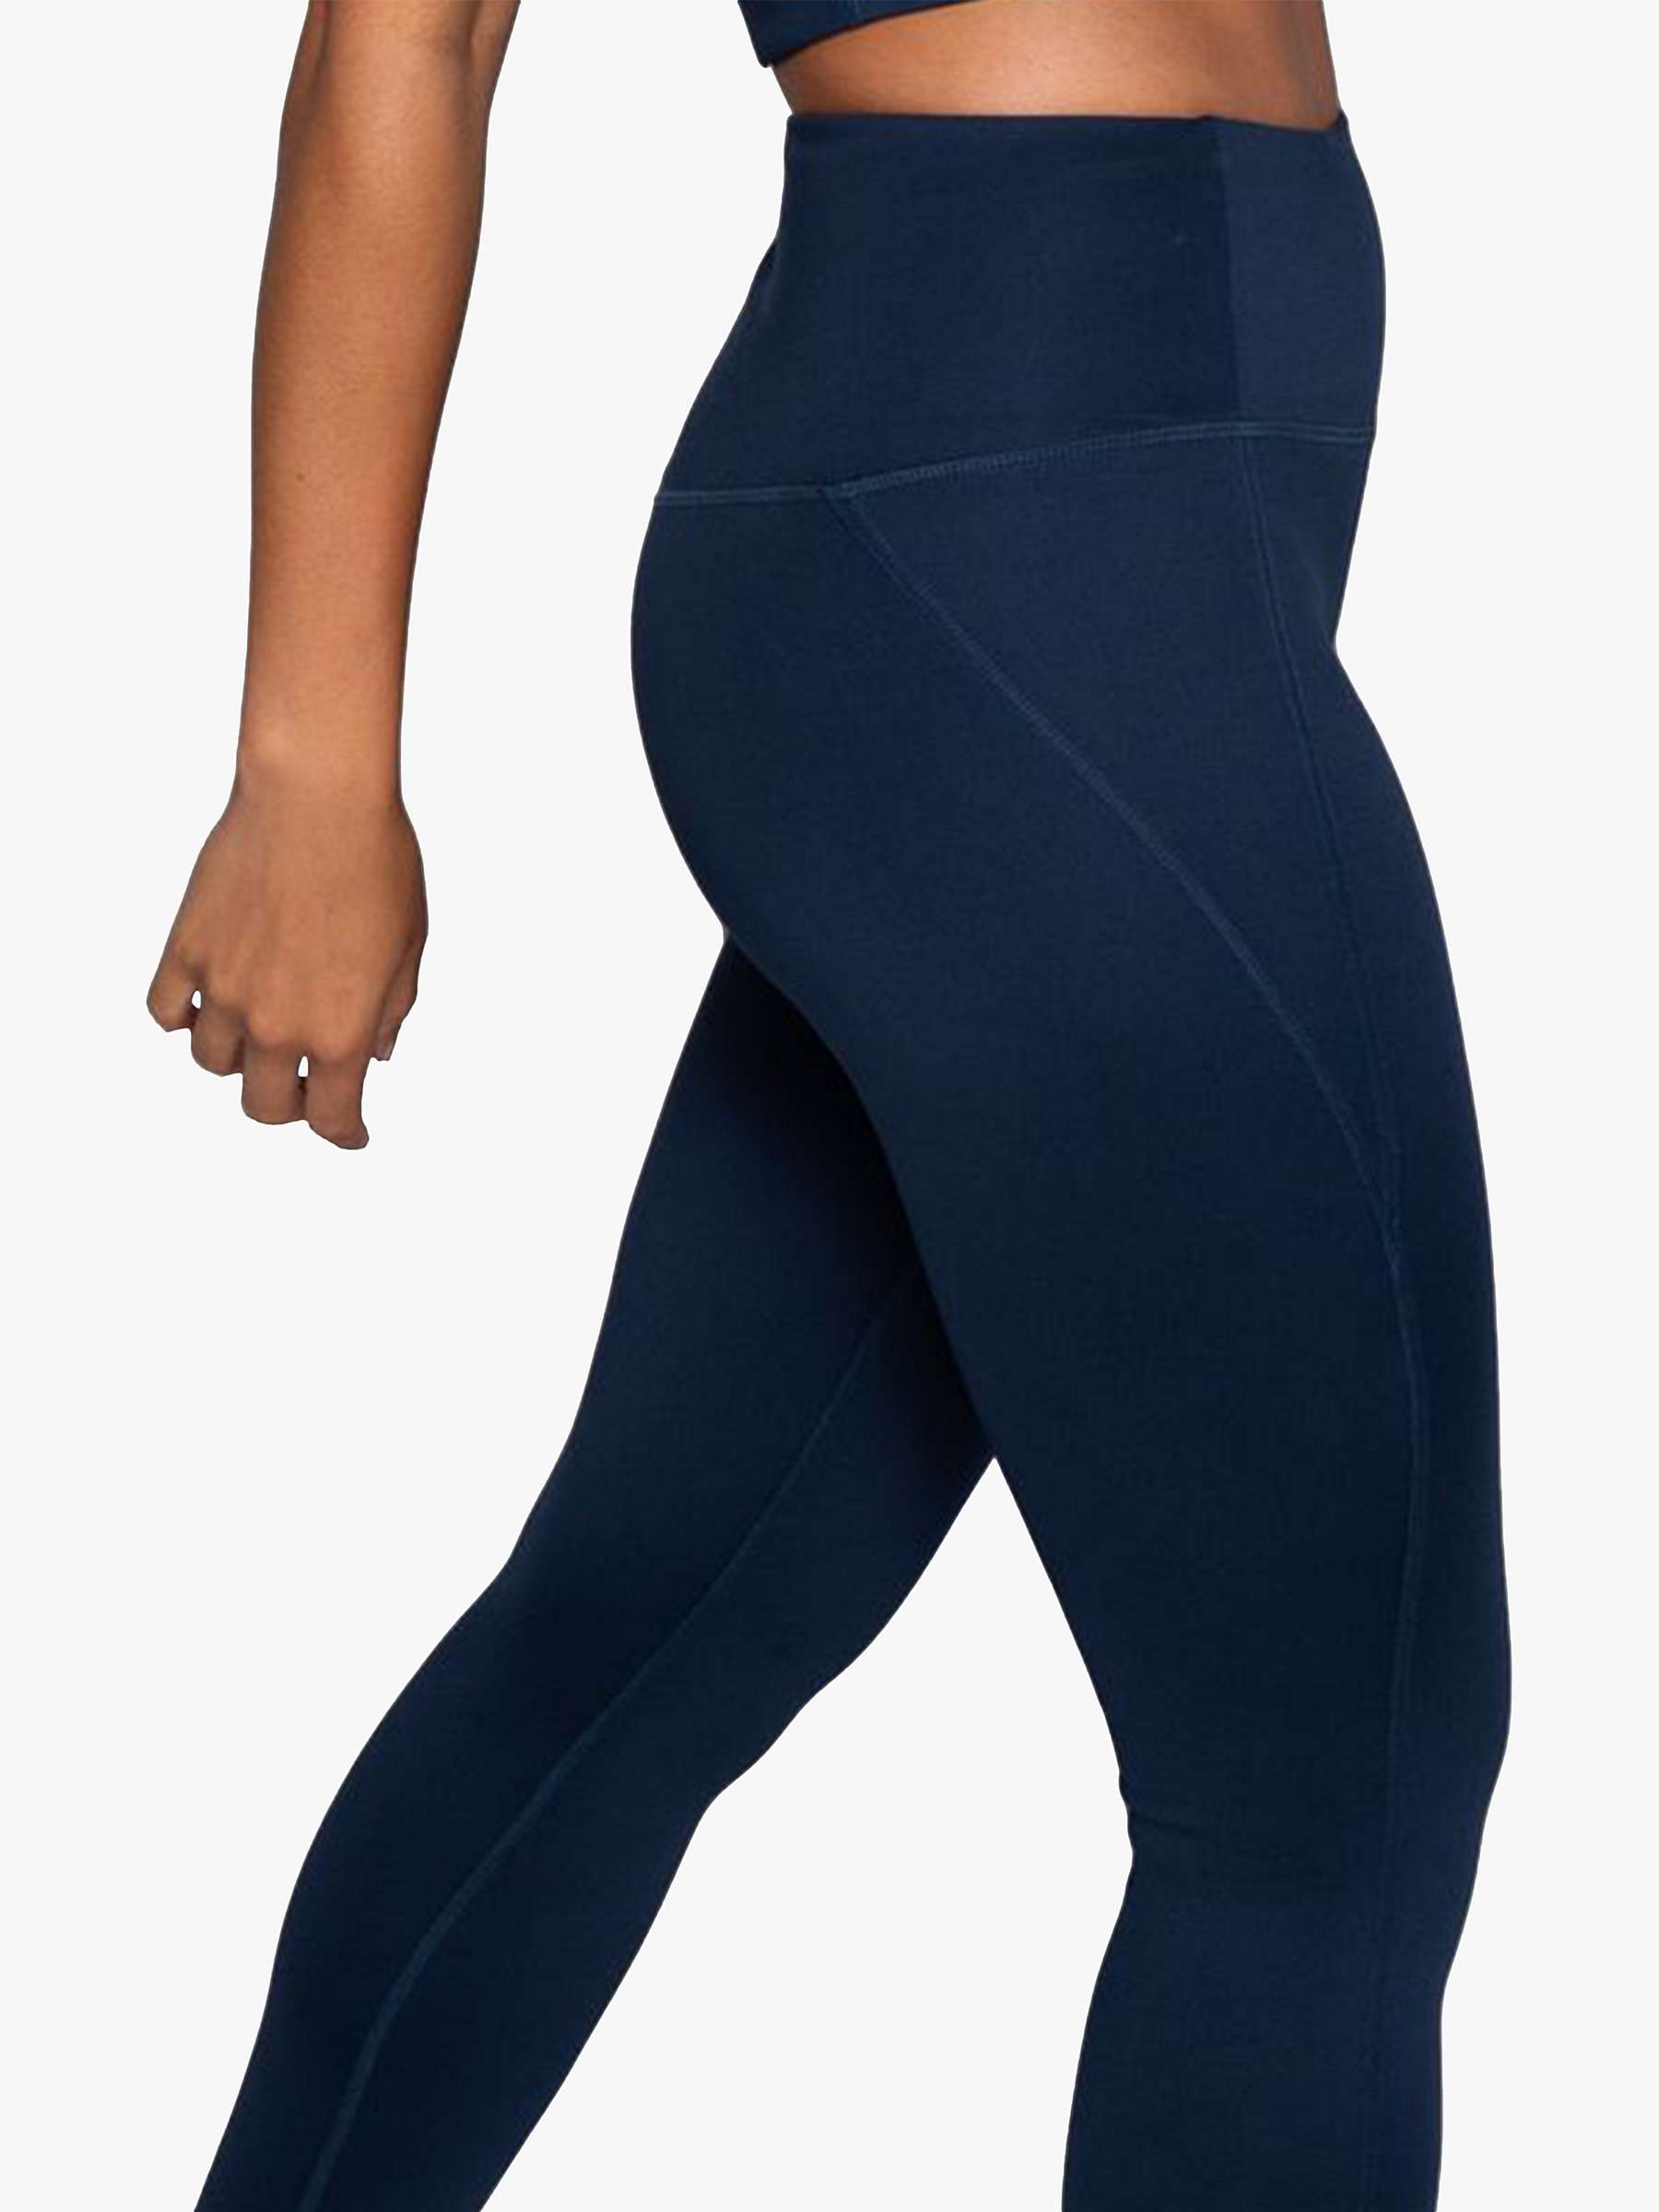 Buy Girlfriend Collective Compressive High Rise Full Length Leggings Online at johnlewis.com